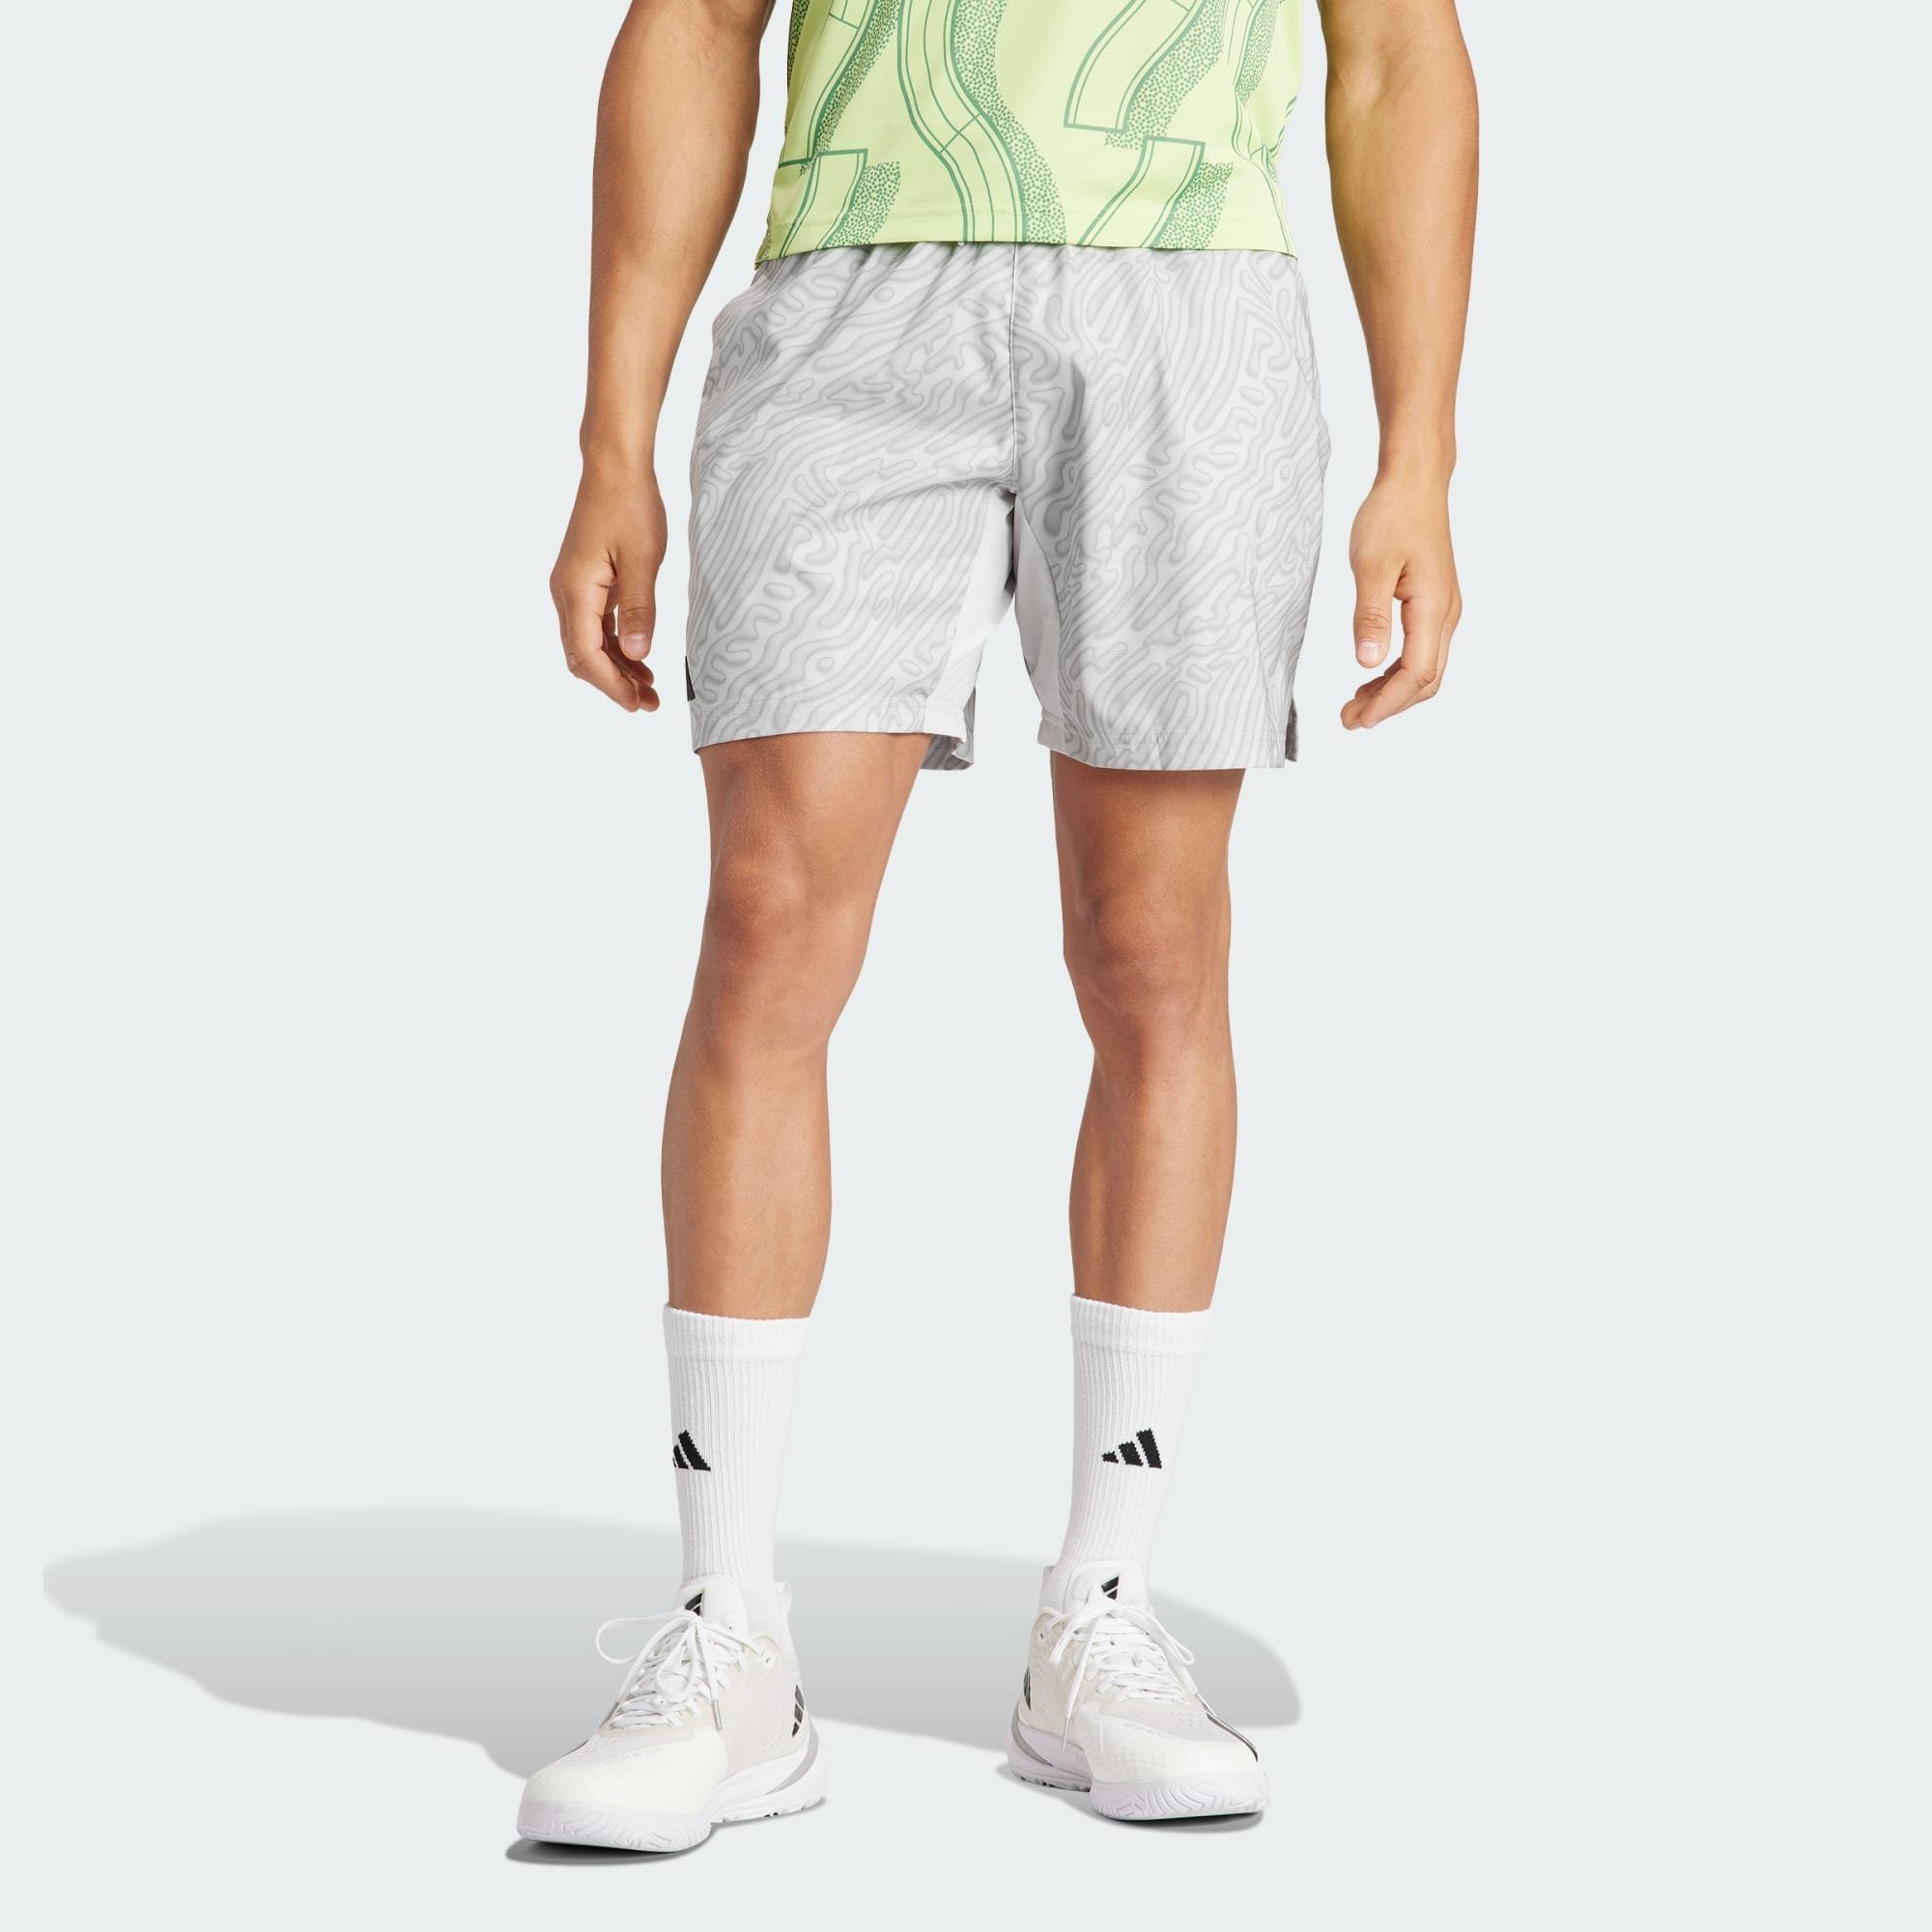 PRO HEAT.RDY One SHORTS Funktionsshorts adidas 7-INCH Grey ERGO TENNIS Solid / PRINTED Charcoal Performance Grey